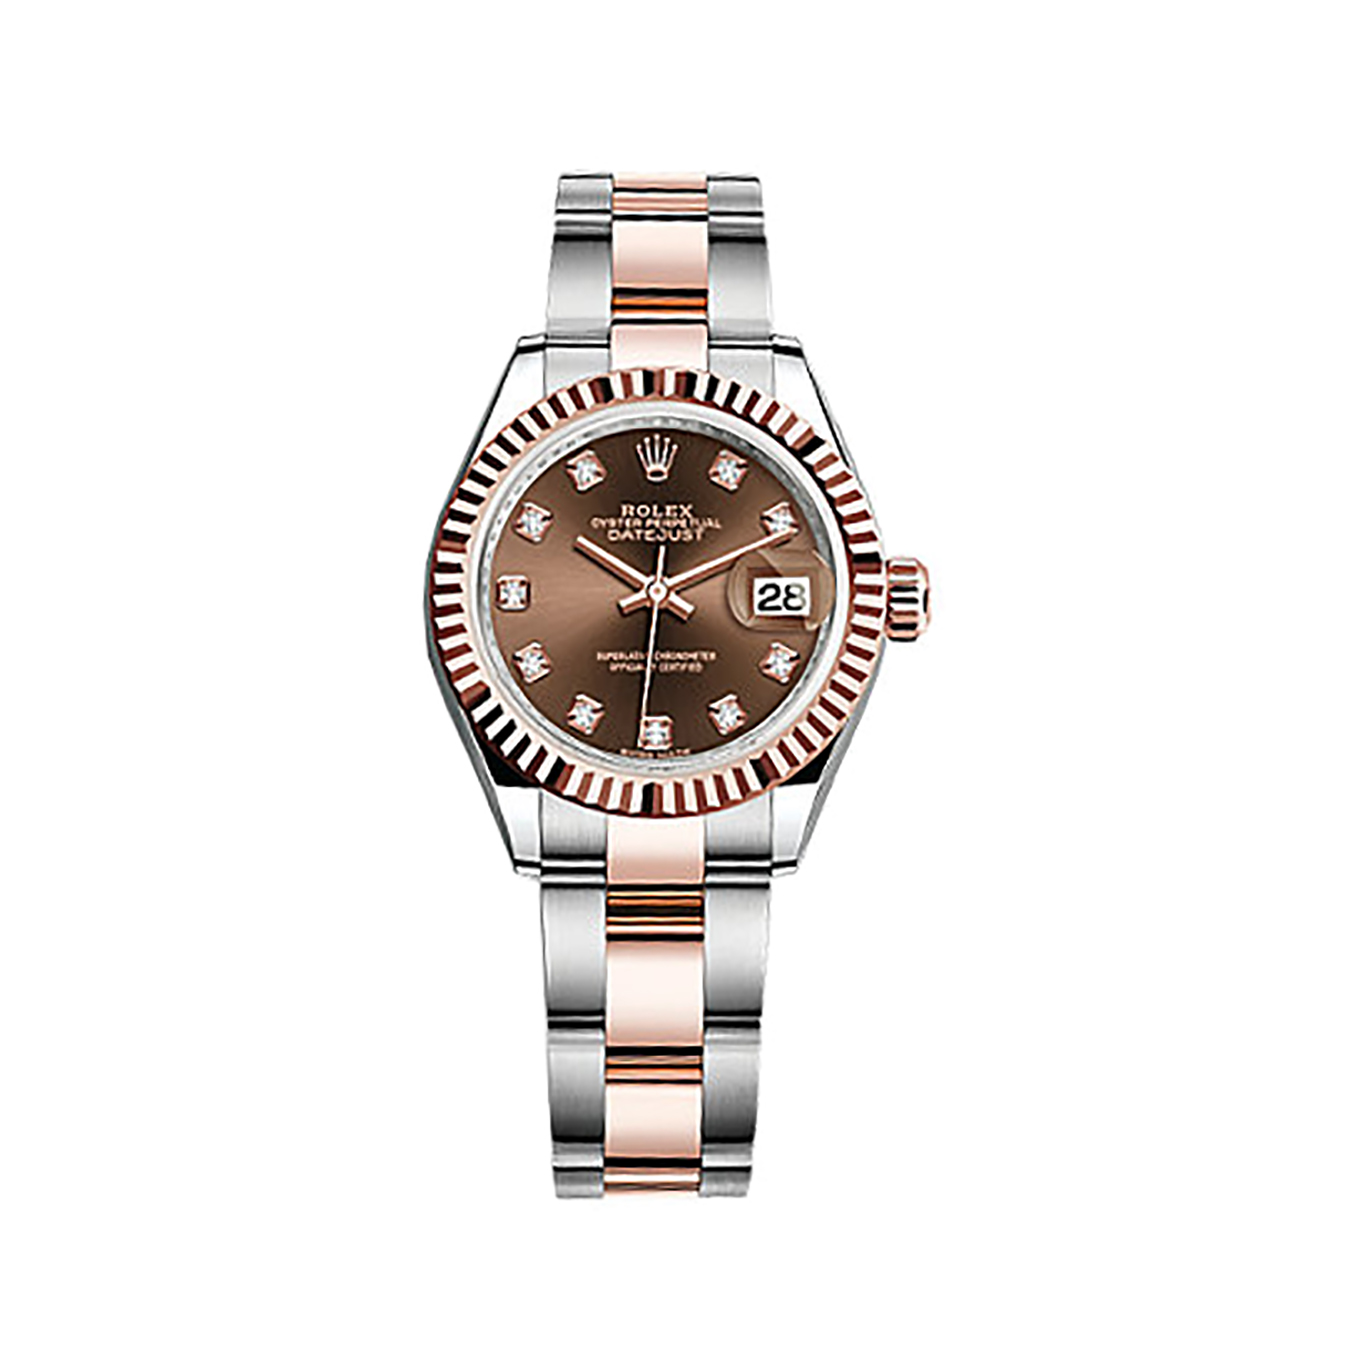 Lady-Datejust 28 279171 Rose Gold & Stainless Steel Watch (Chocolate Set with Diamonds)